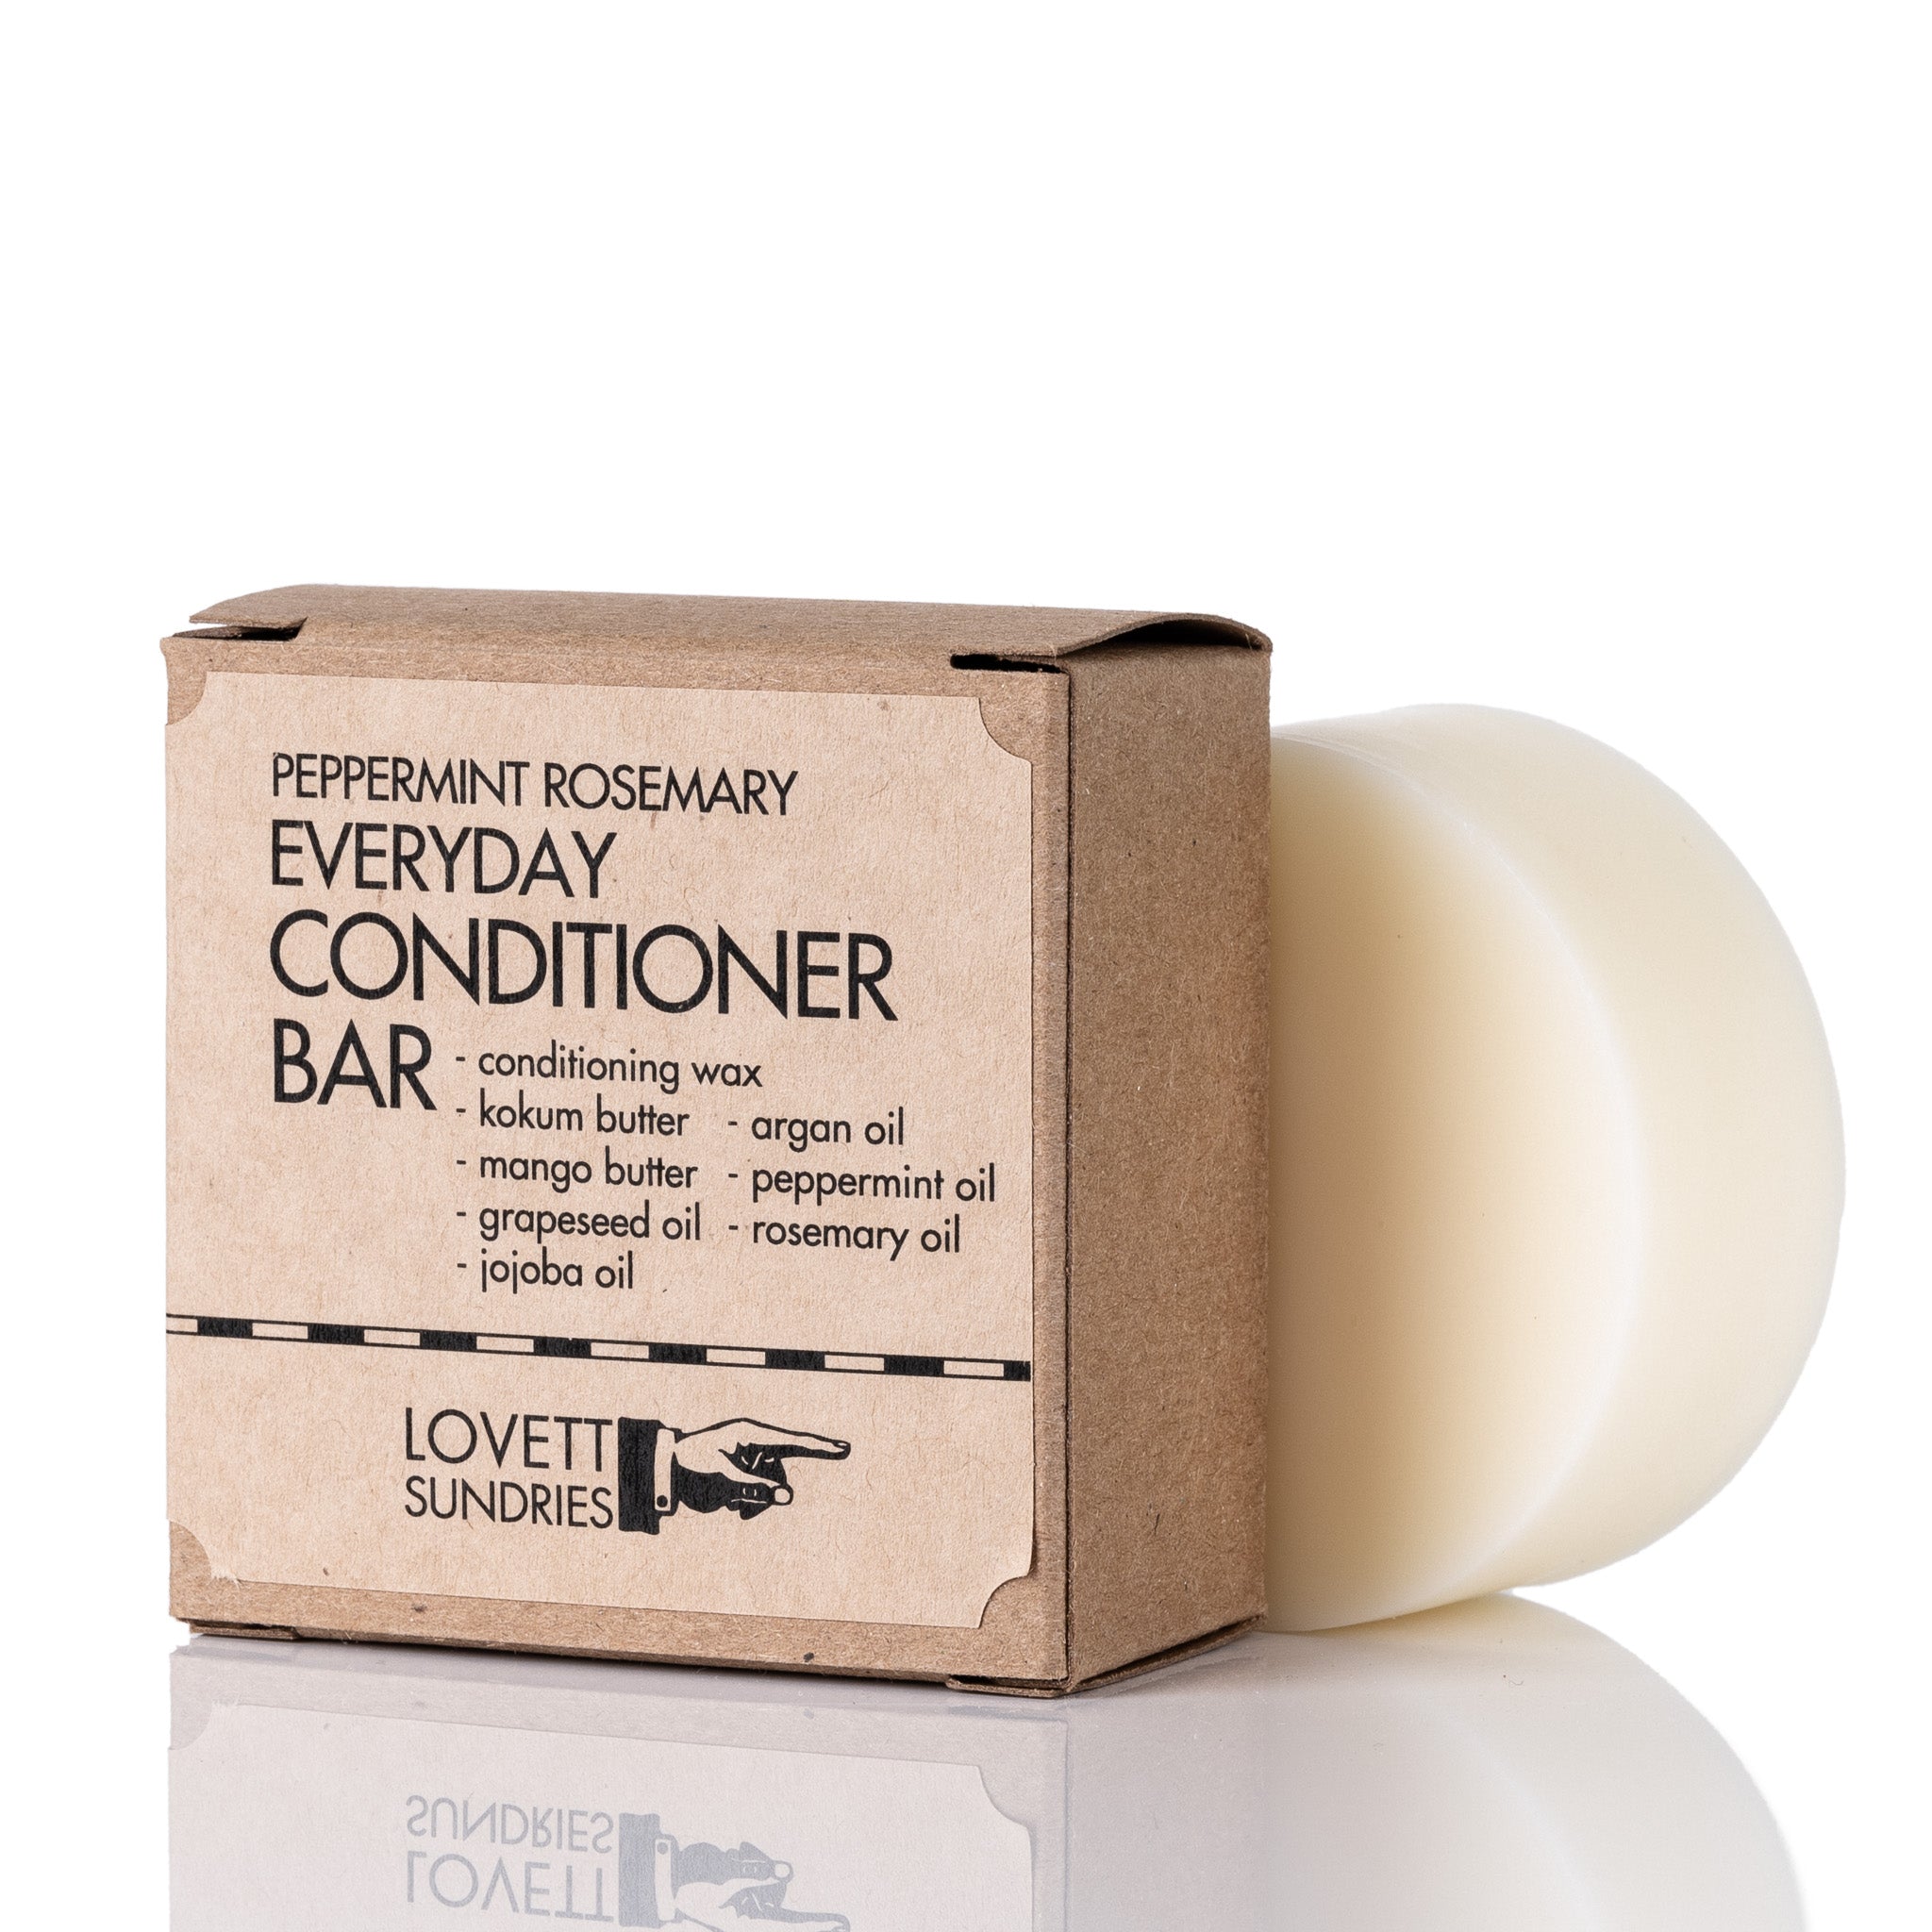 A cardboard container with a peppermint rosemary everyday conditioner bar.